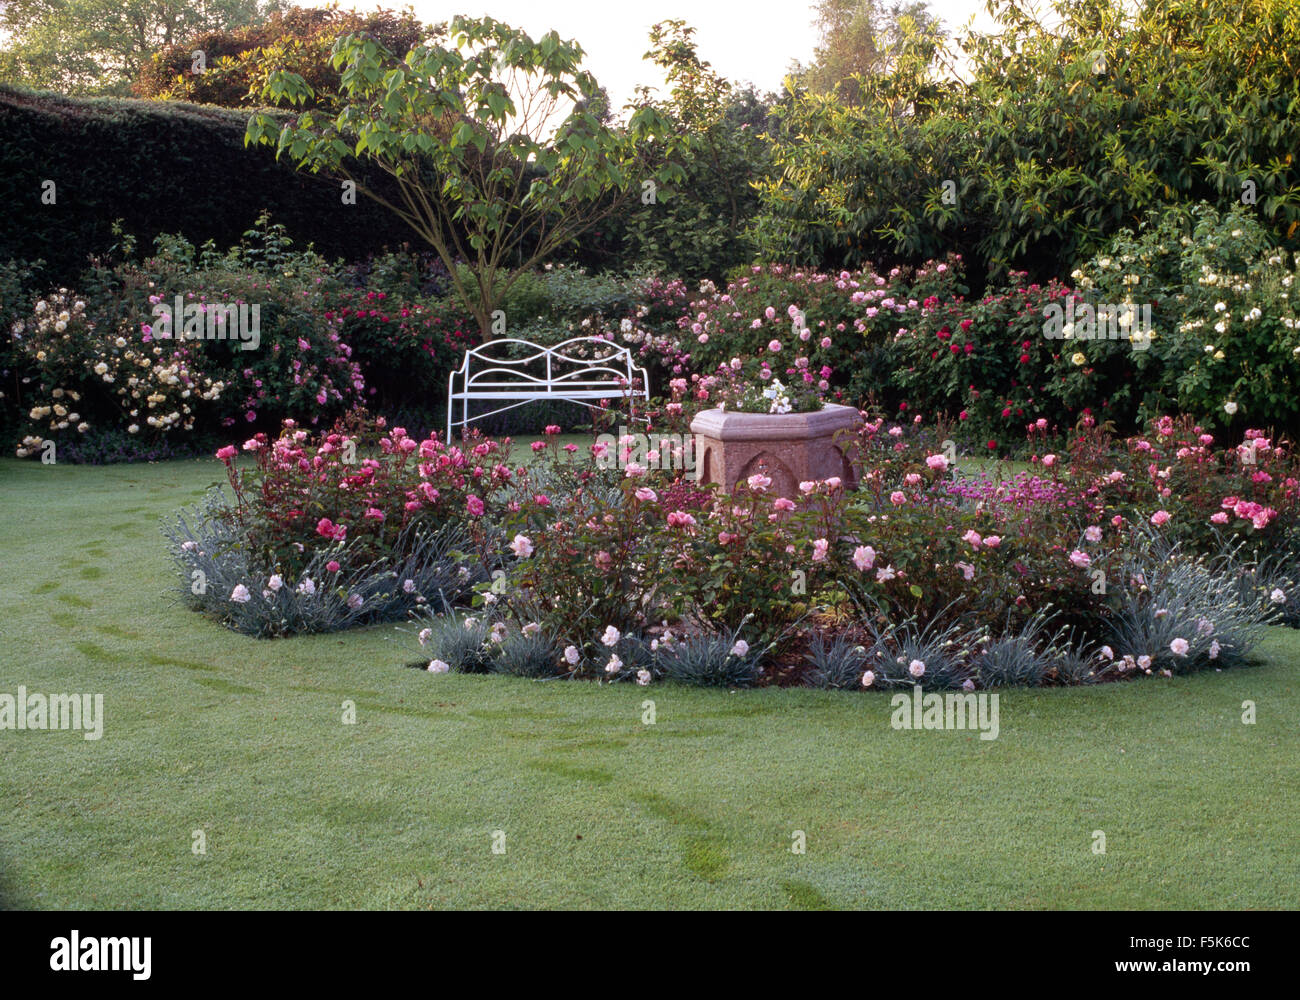 Pink roses in garden beds edged with white dianthus in a country rose garden with a white metal bench Stock Photo